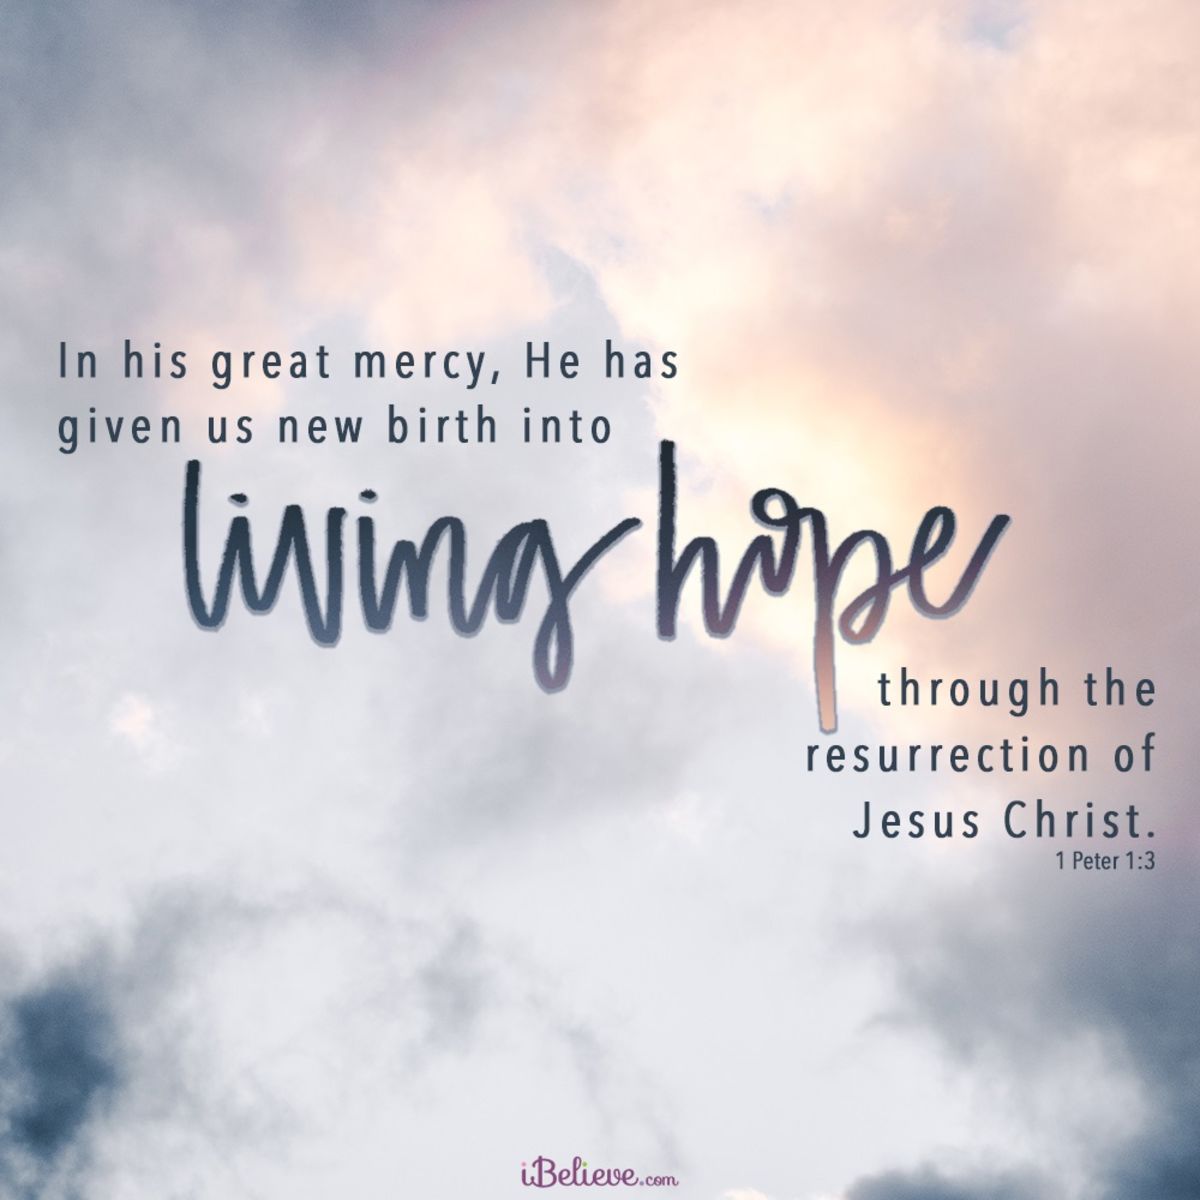 In difficult times, let's anchor our hope in Jesus. His resurrection assures us of victory over challenges. Let's cling to this living hope! 🙏 #1Peter #HopeInChrist